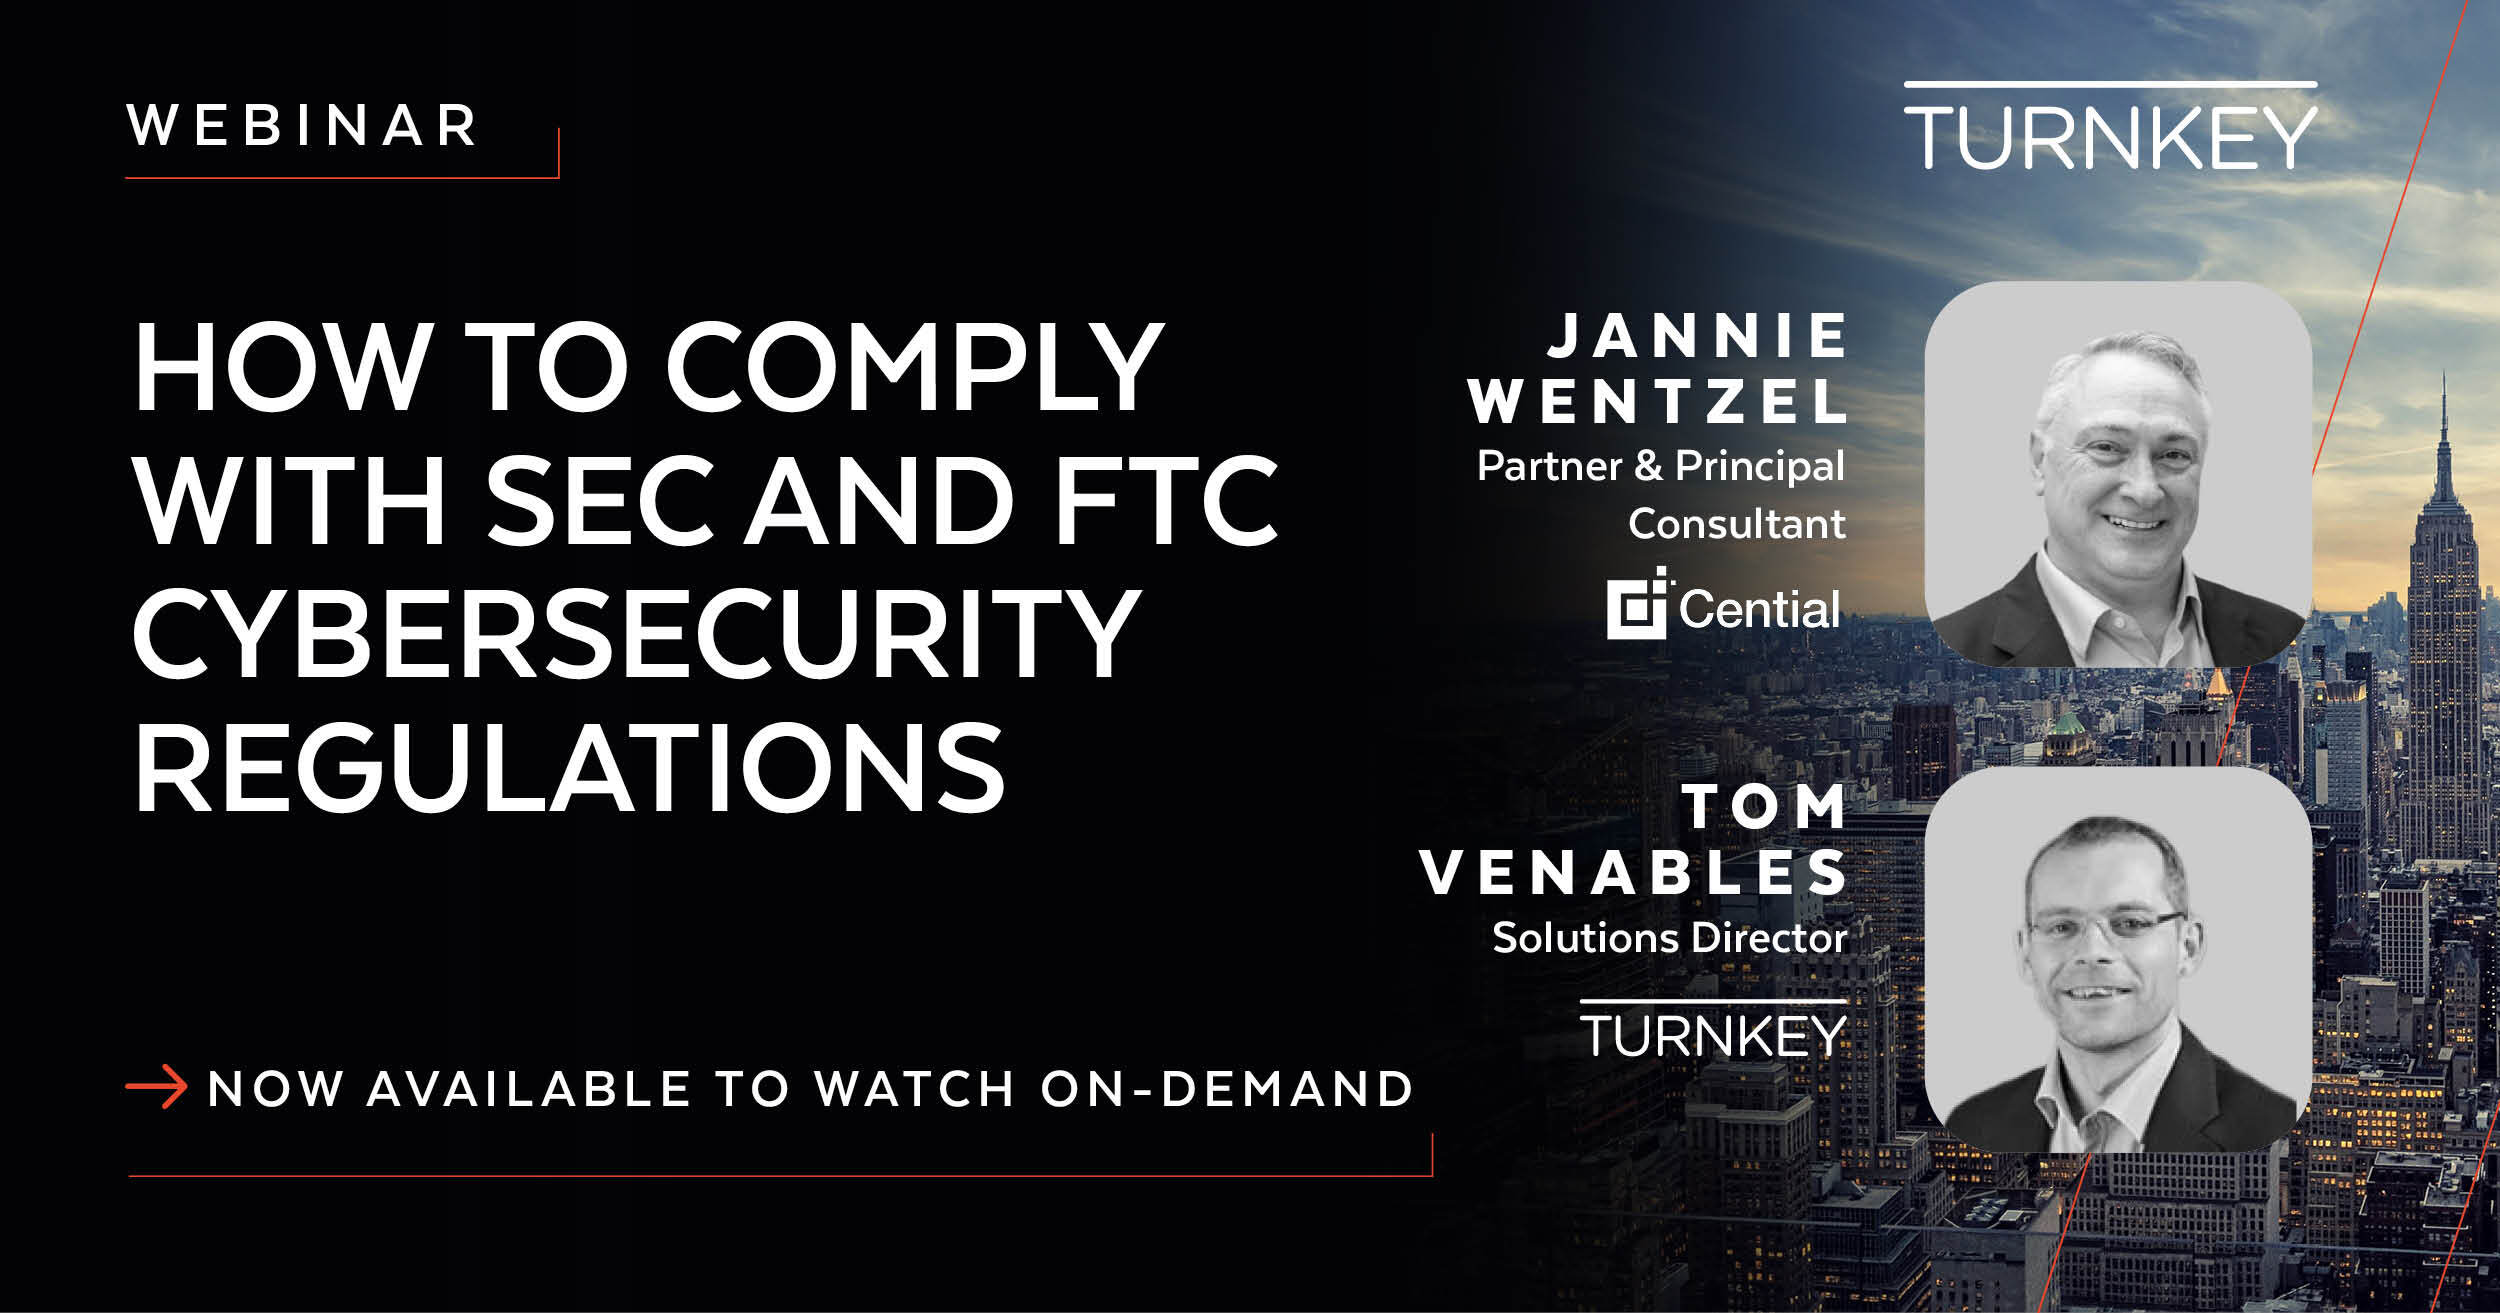 Turnkey Navigating SEC and FTC cybersecurity regulations A comprehensive guide to compliance - ON DEMAND2-1